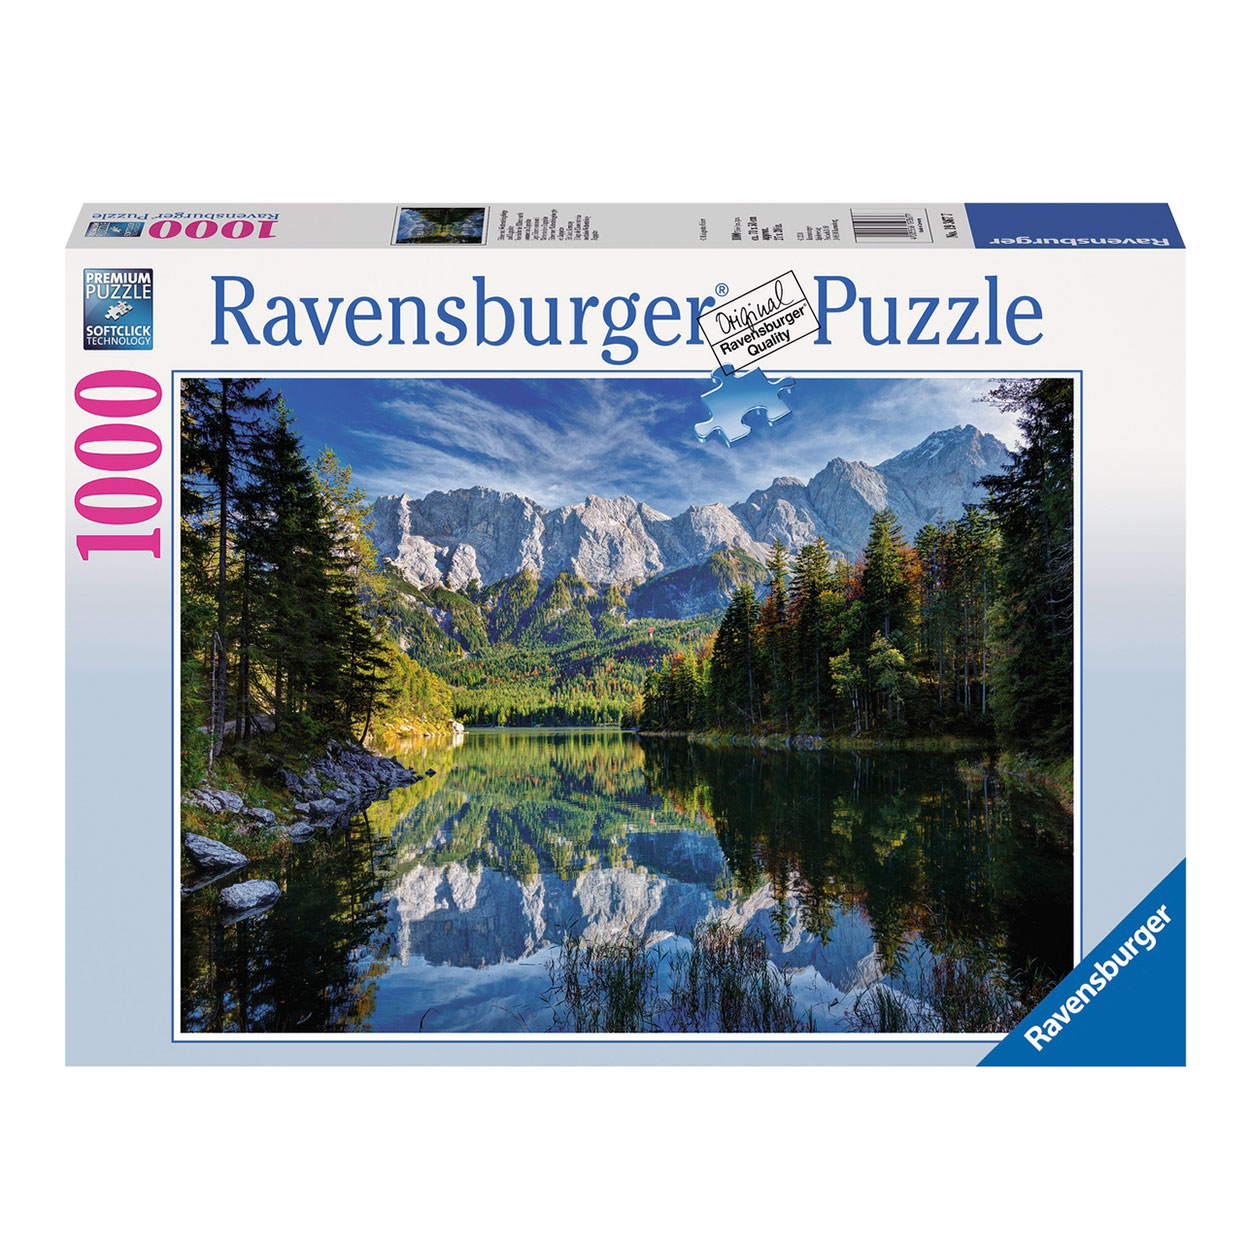 Ravensburger Puzzle 1000 Piece Eibsee with Wetterstein Mountains And 